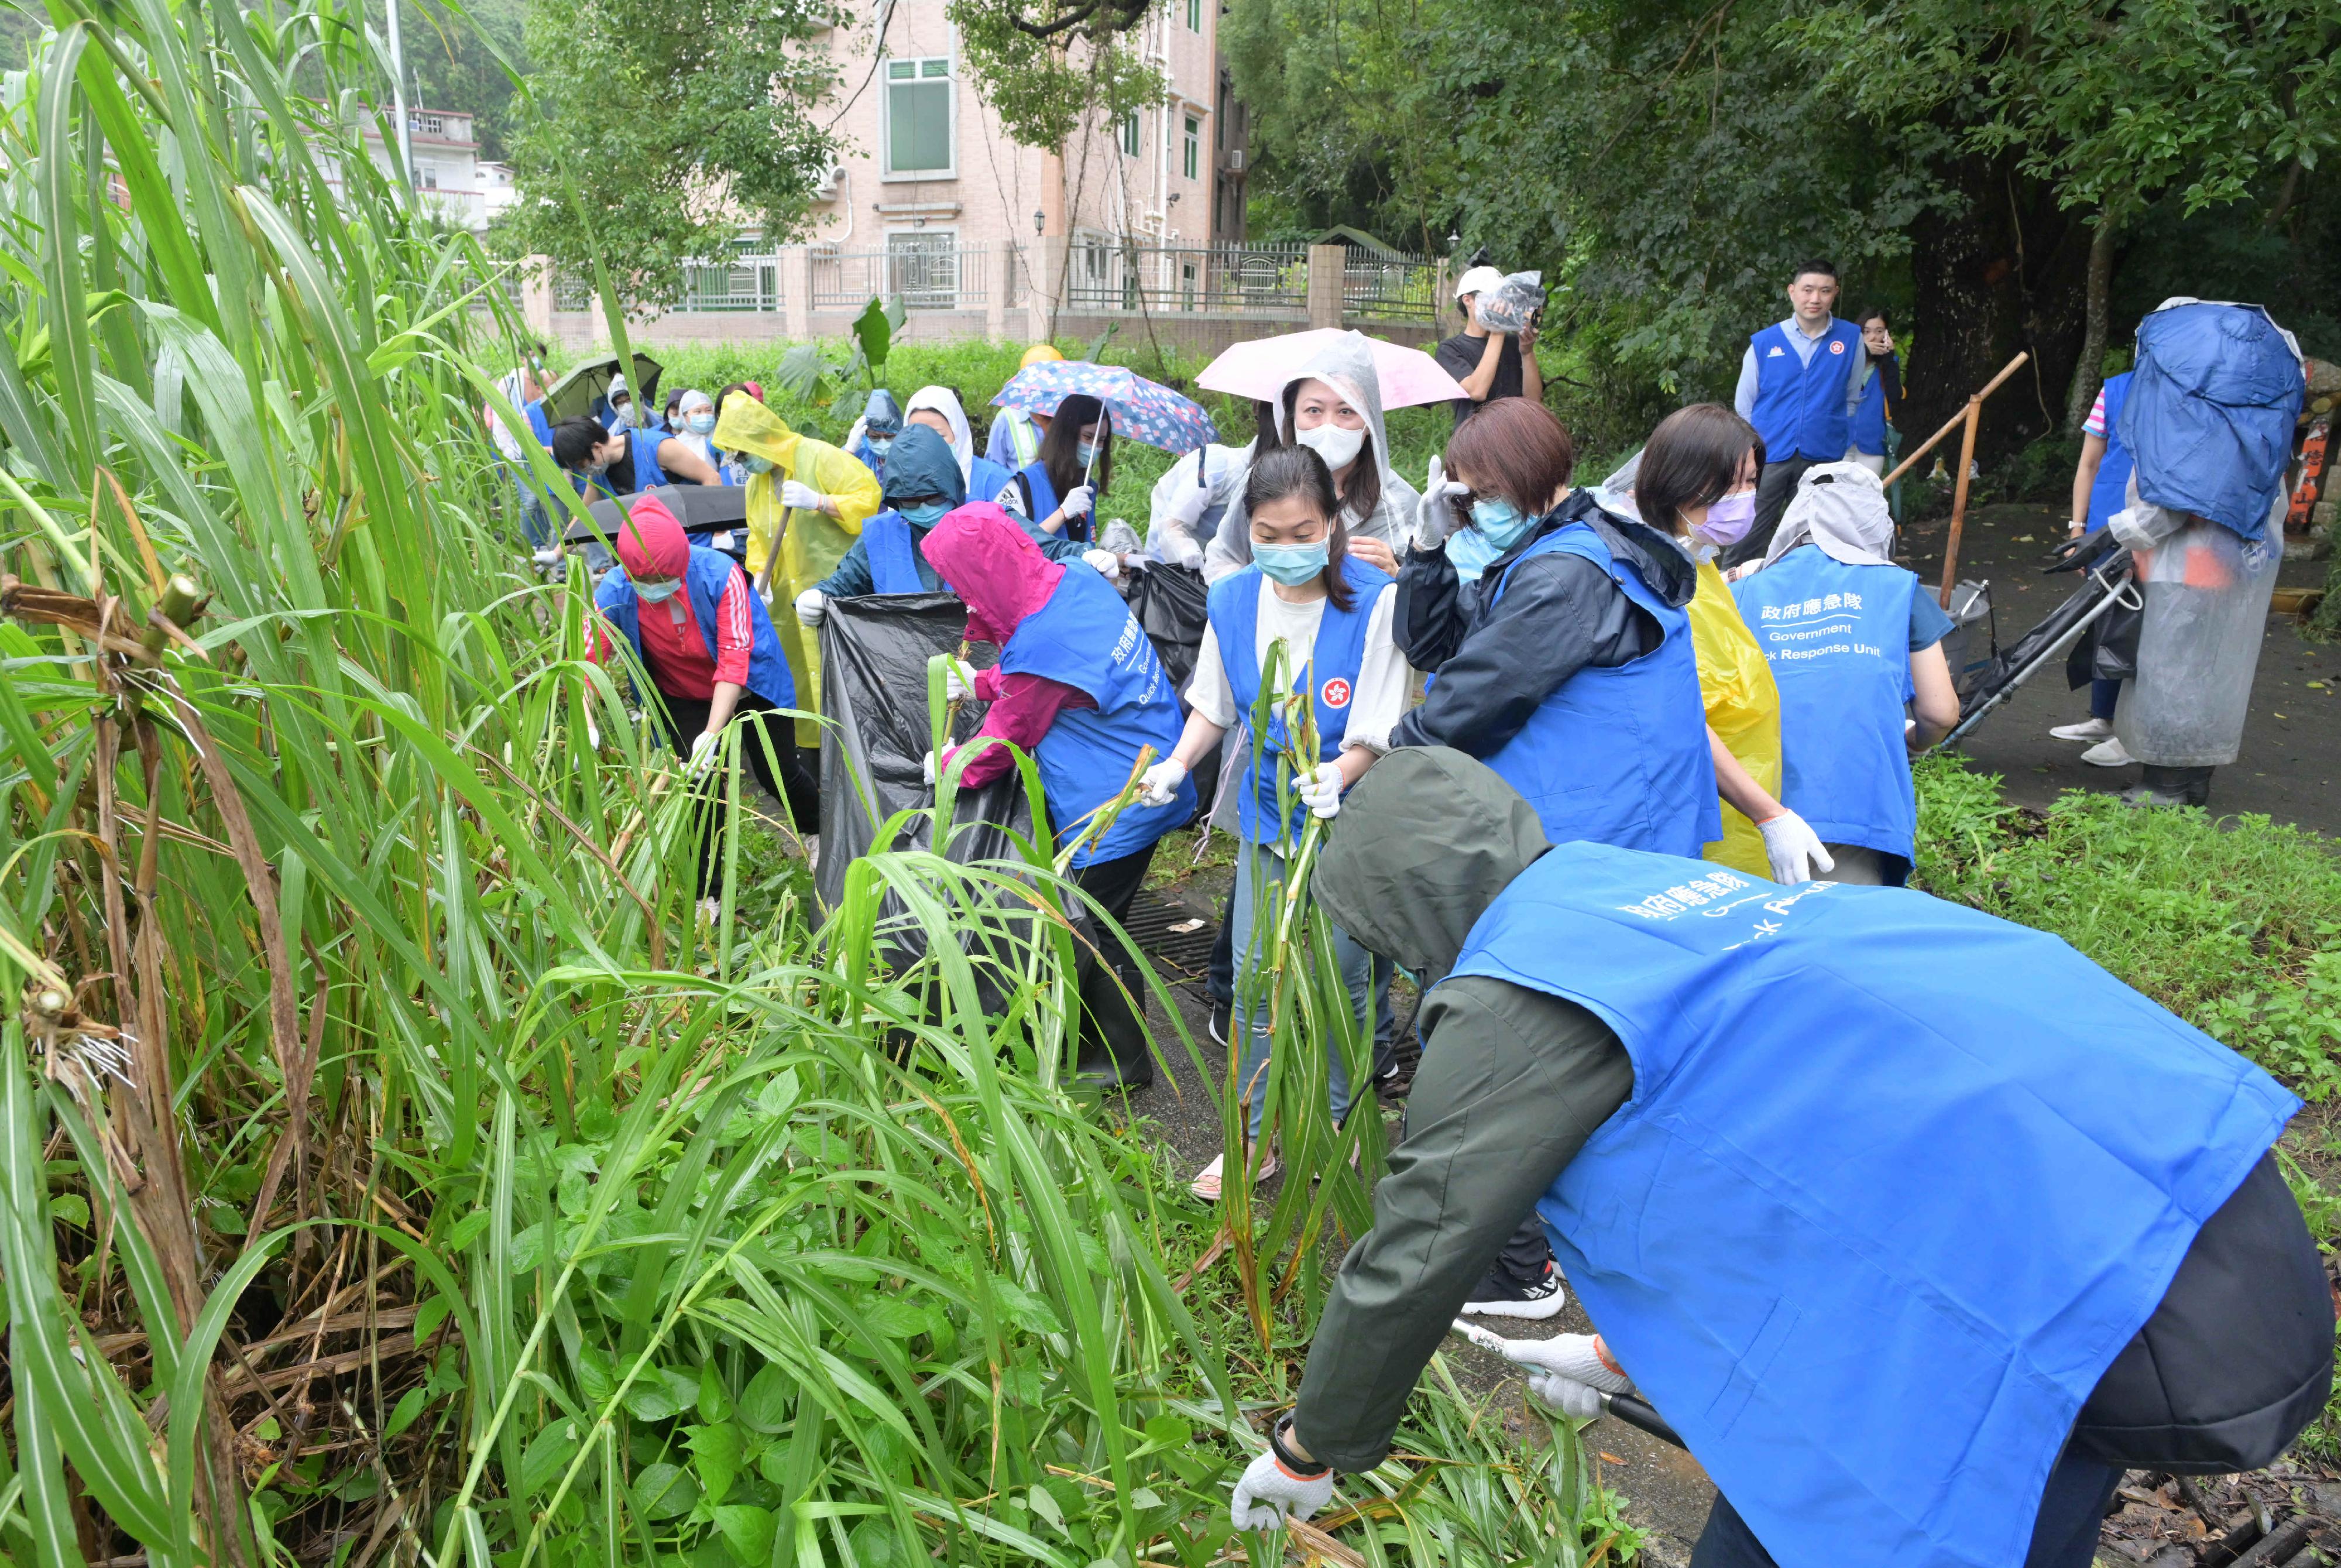 The Chief Executive, Mr John Lee, announced the activation of the mobilisation protocol for civil servants to conduct at full steam the relief work following extensive flooding caused by torrential rain brought by low pressure associated with remnants of Haikui. Photo shows supporting members carrying out clean-up work at Ma Mei Ha in Fanling today (September 9).